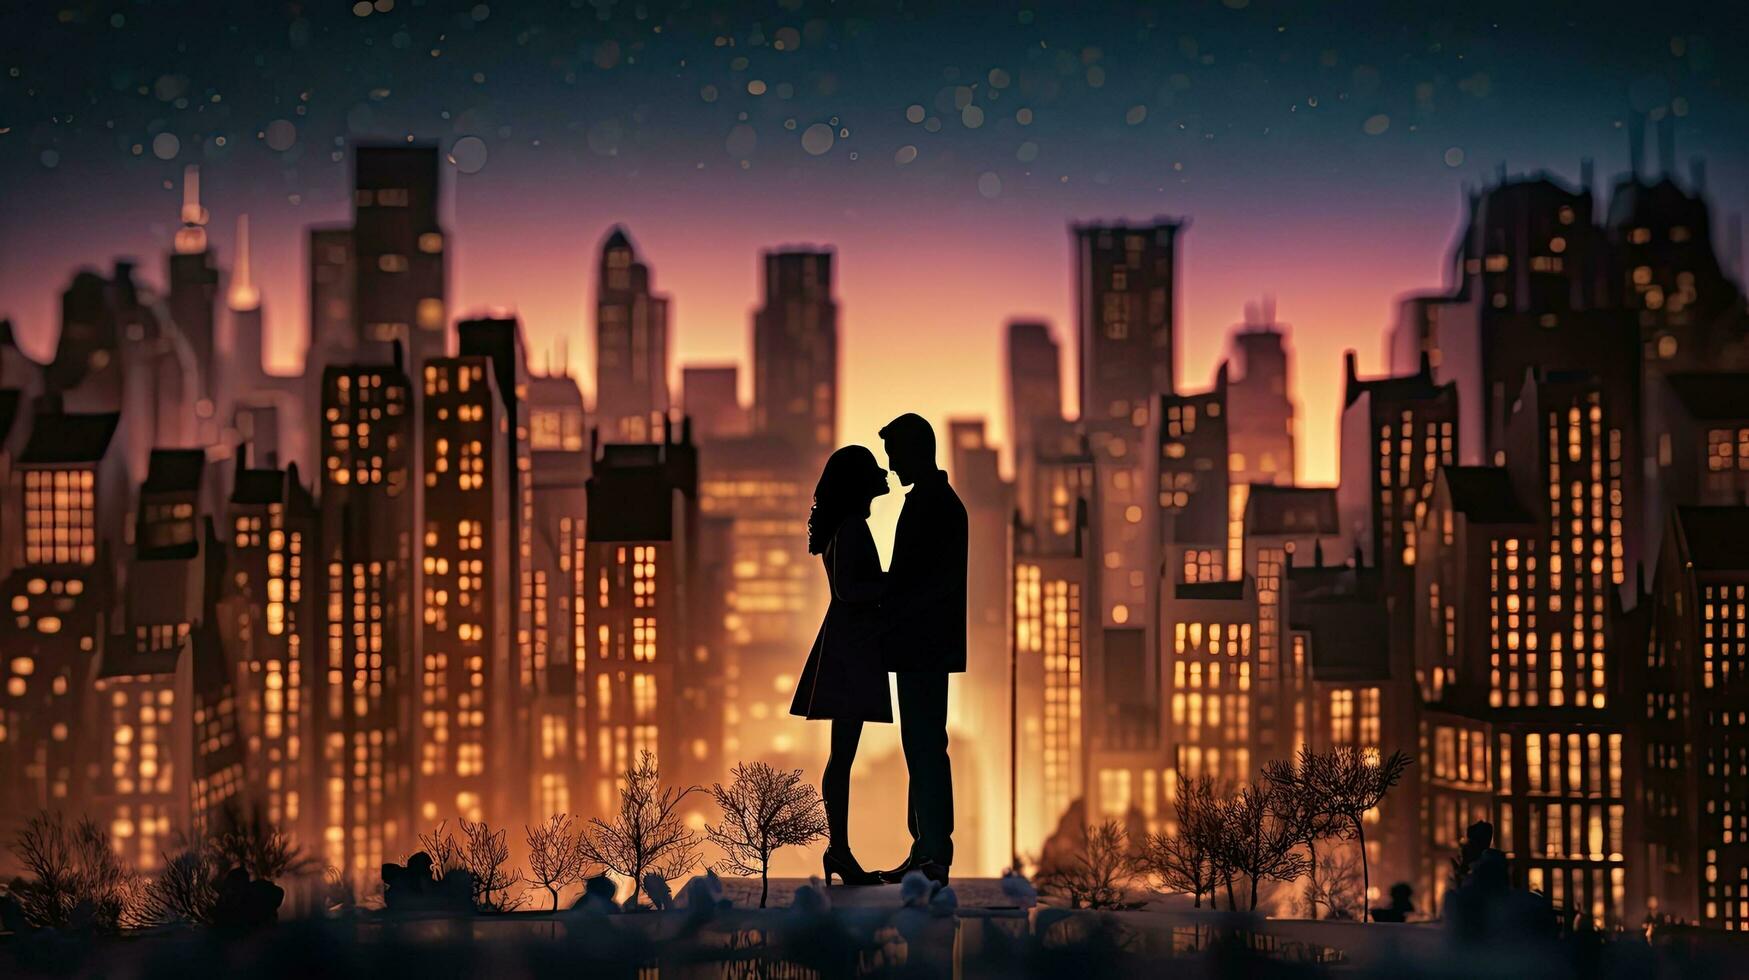 Romantic silhouettes in front of a nighttime cityscape featuring miniatures of realistic buildings with lights in a cartoon style photo